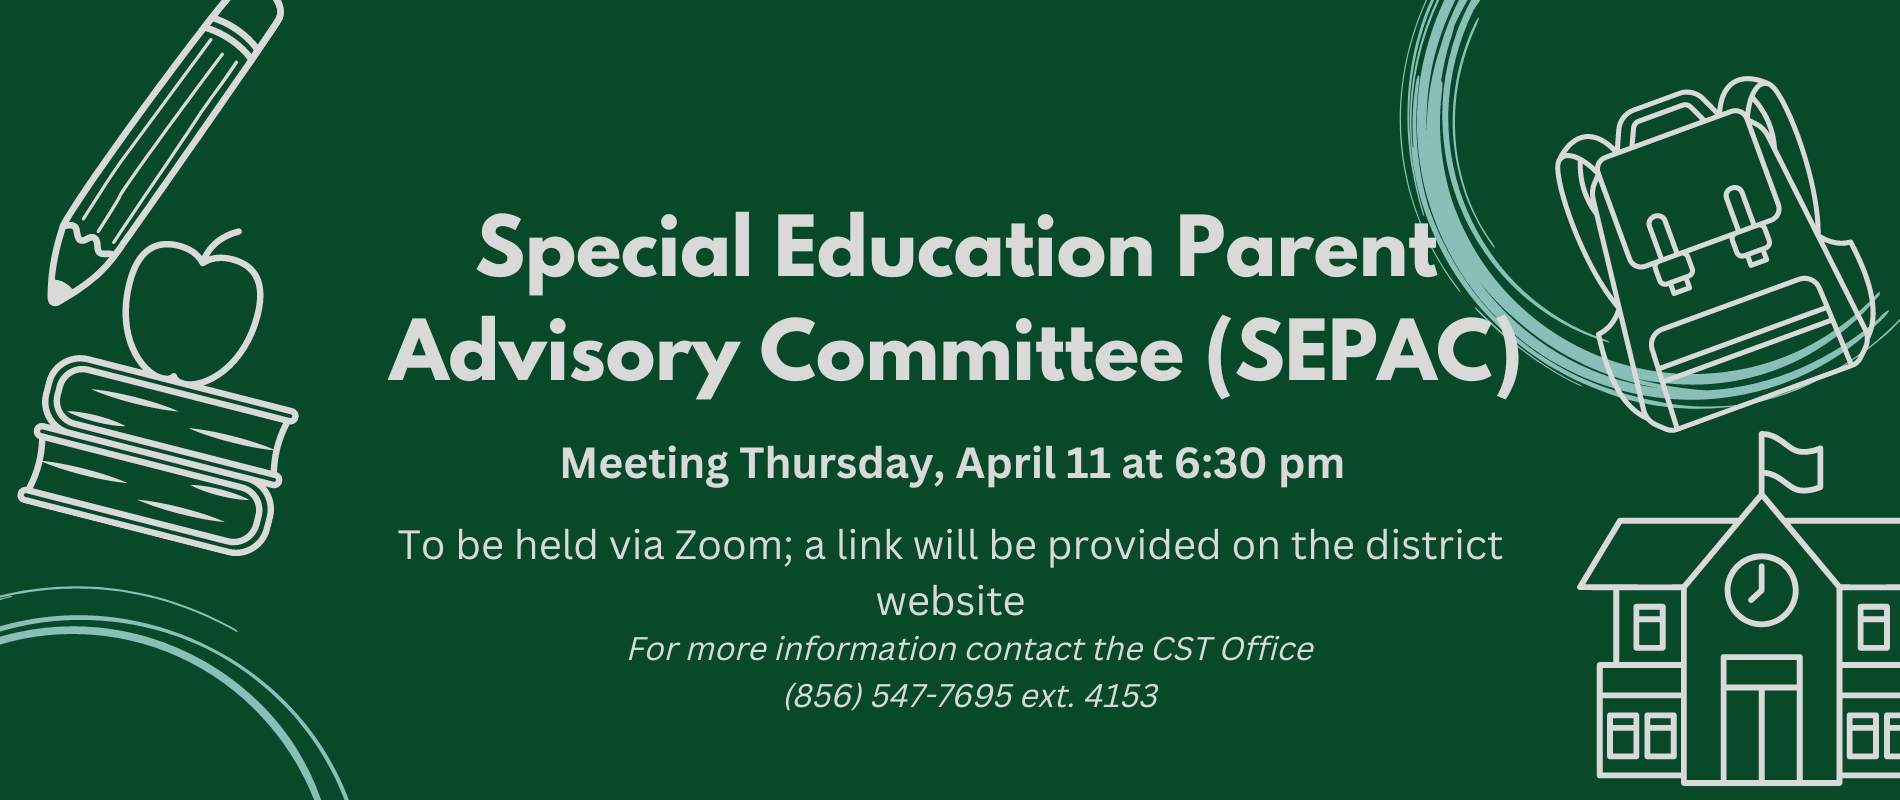 Special Education Parent Advisory Committee Meeting